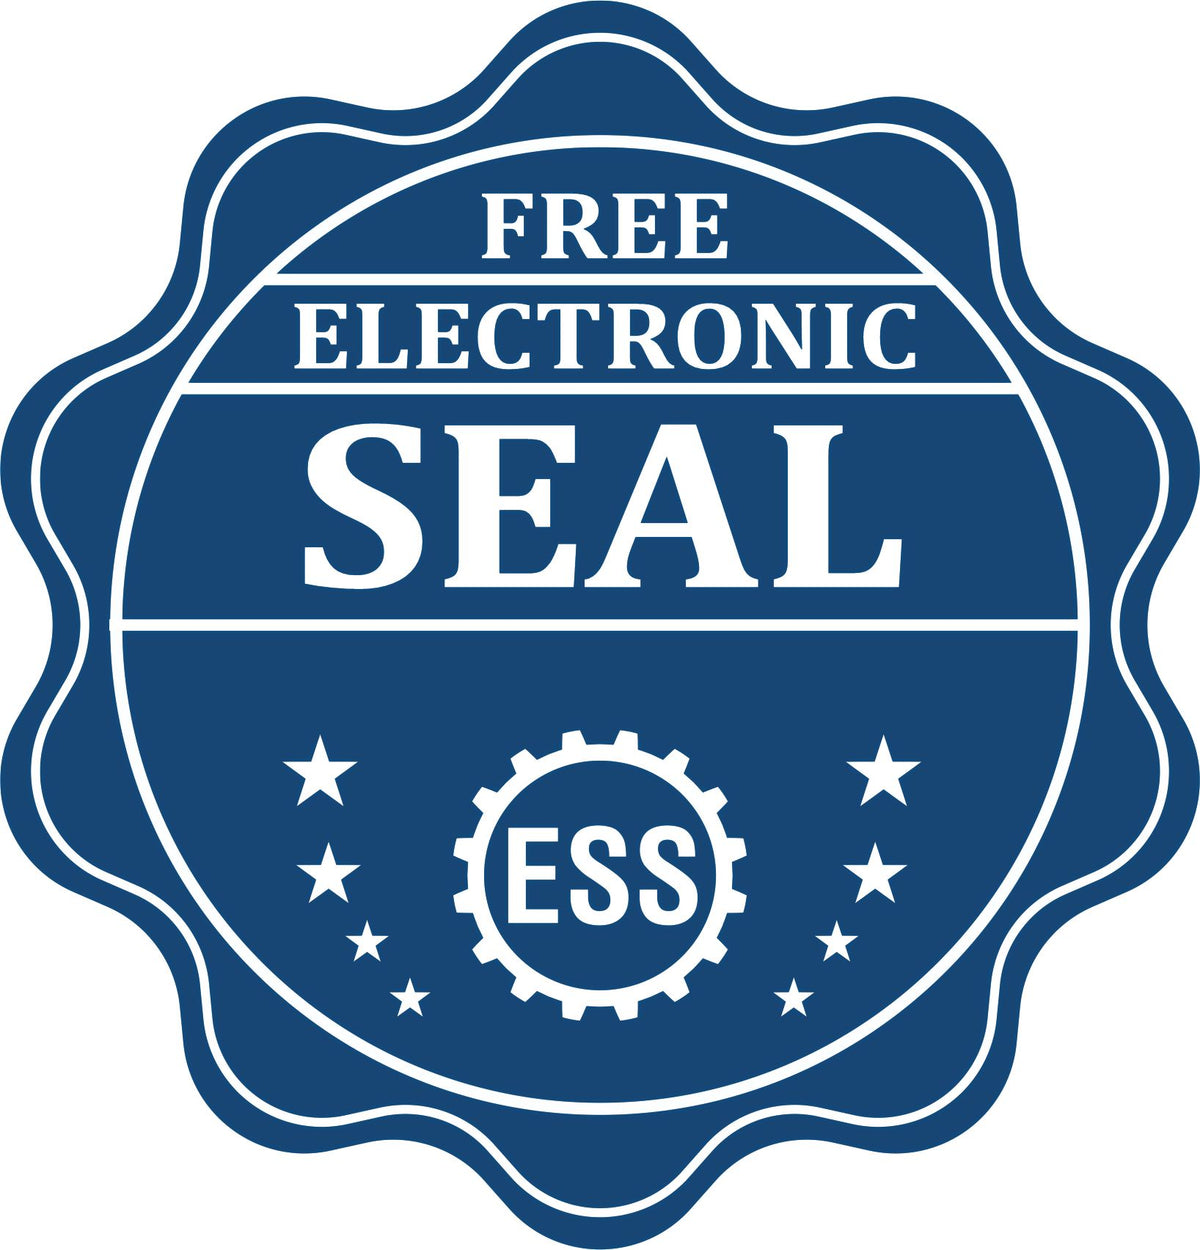 A badge showing a free electronic seal for the Slim Pre-Inked Virginia Professional Engineer Seal Stamp with stars and the ESS gear on the emblem.